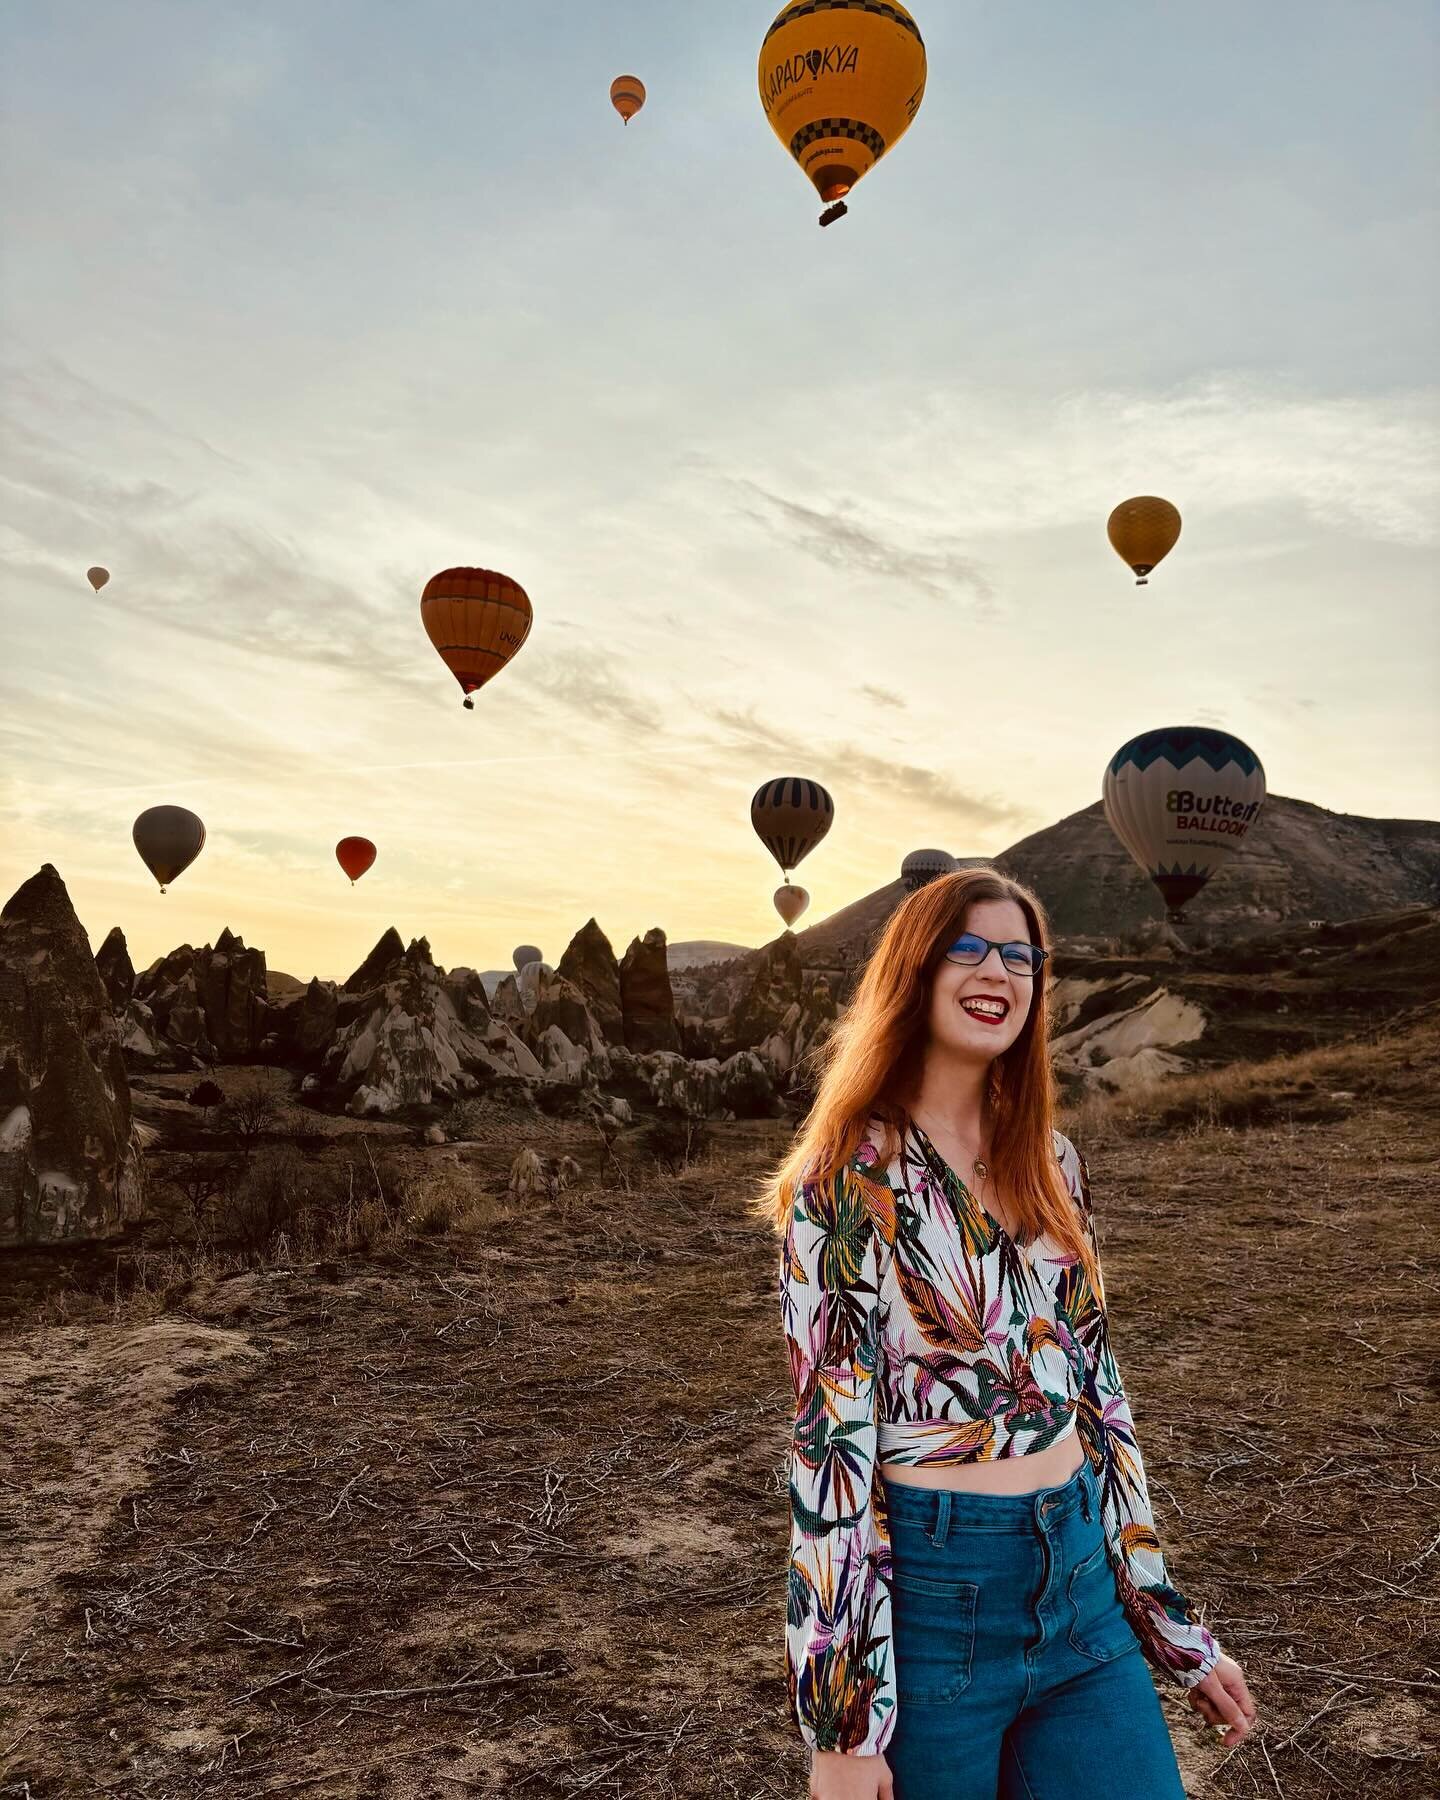 Life was meant for chasing sunrises and hot air balloons around the world 🫶🏻

I could stay in this valley enjoying the magic of the hot air balloons for a while.